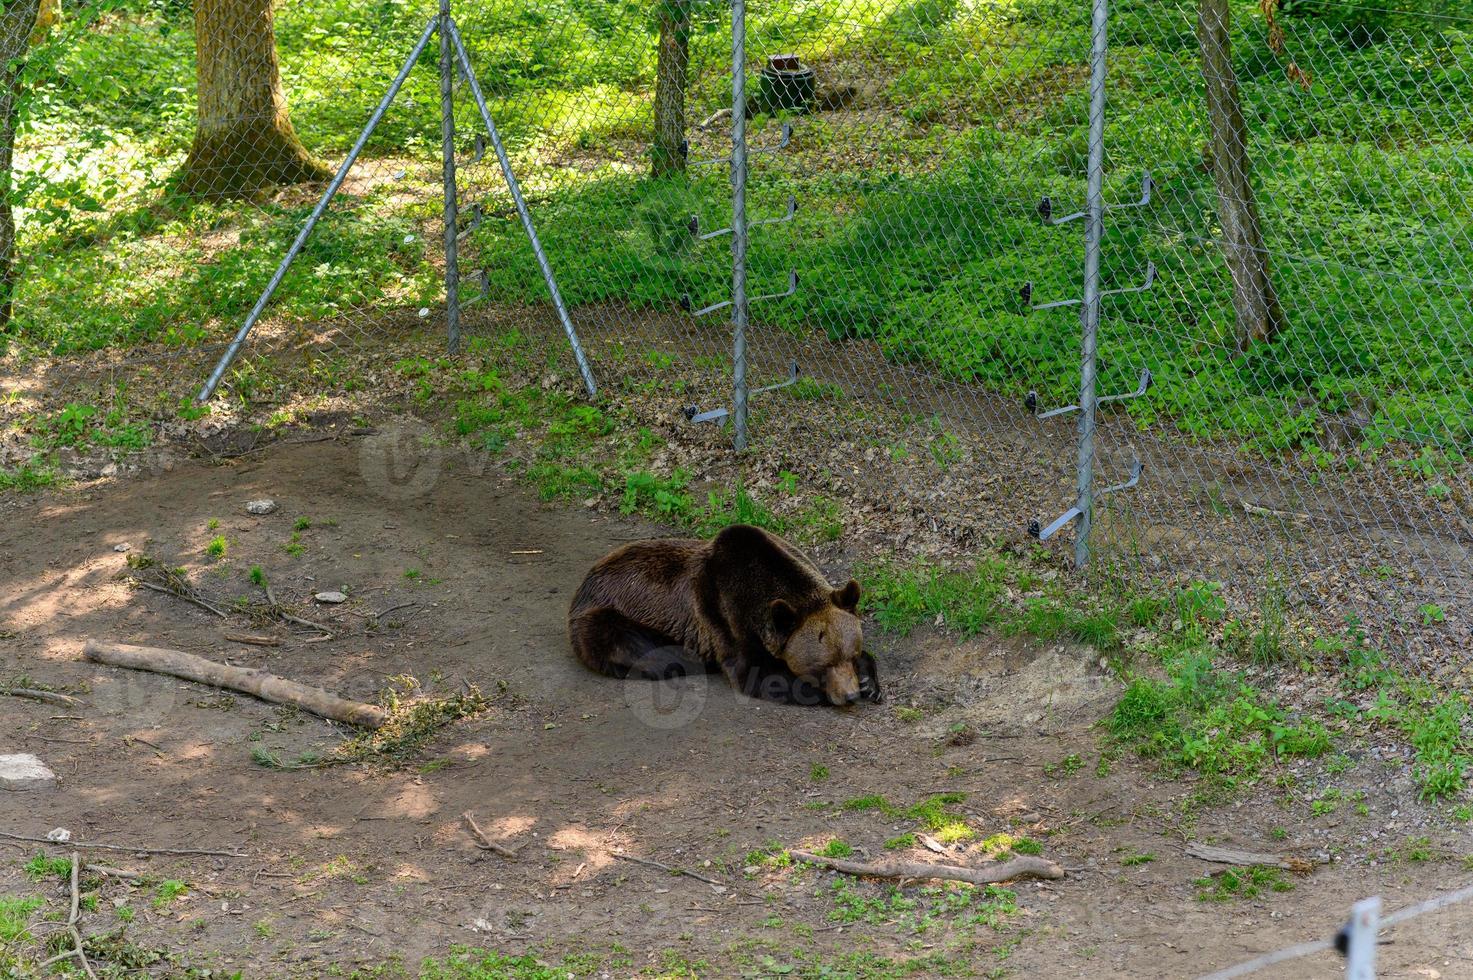 Rescued Bear from people in the reserve. photo